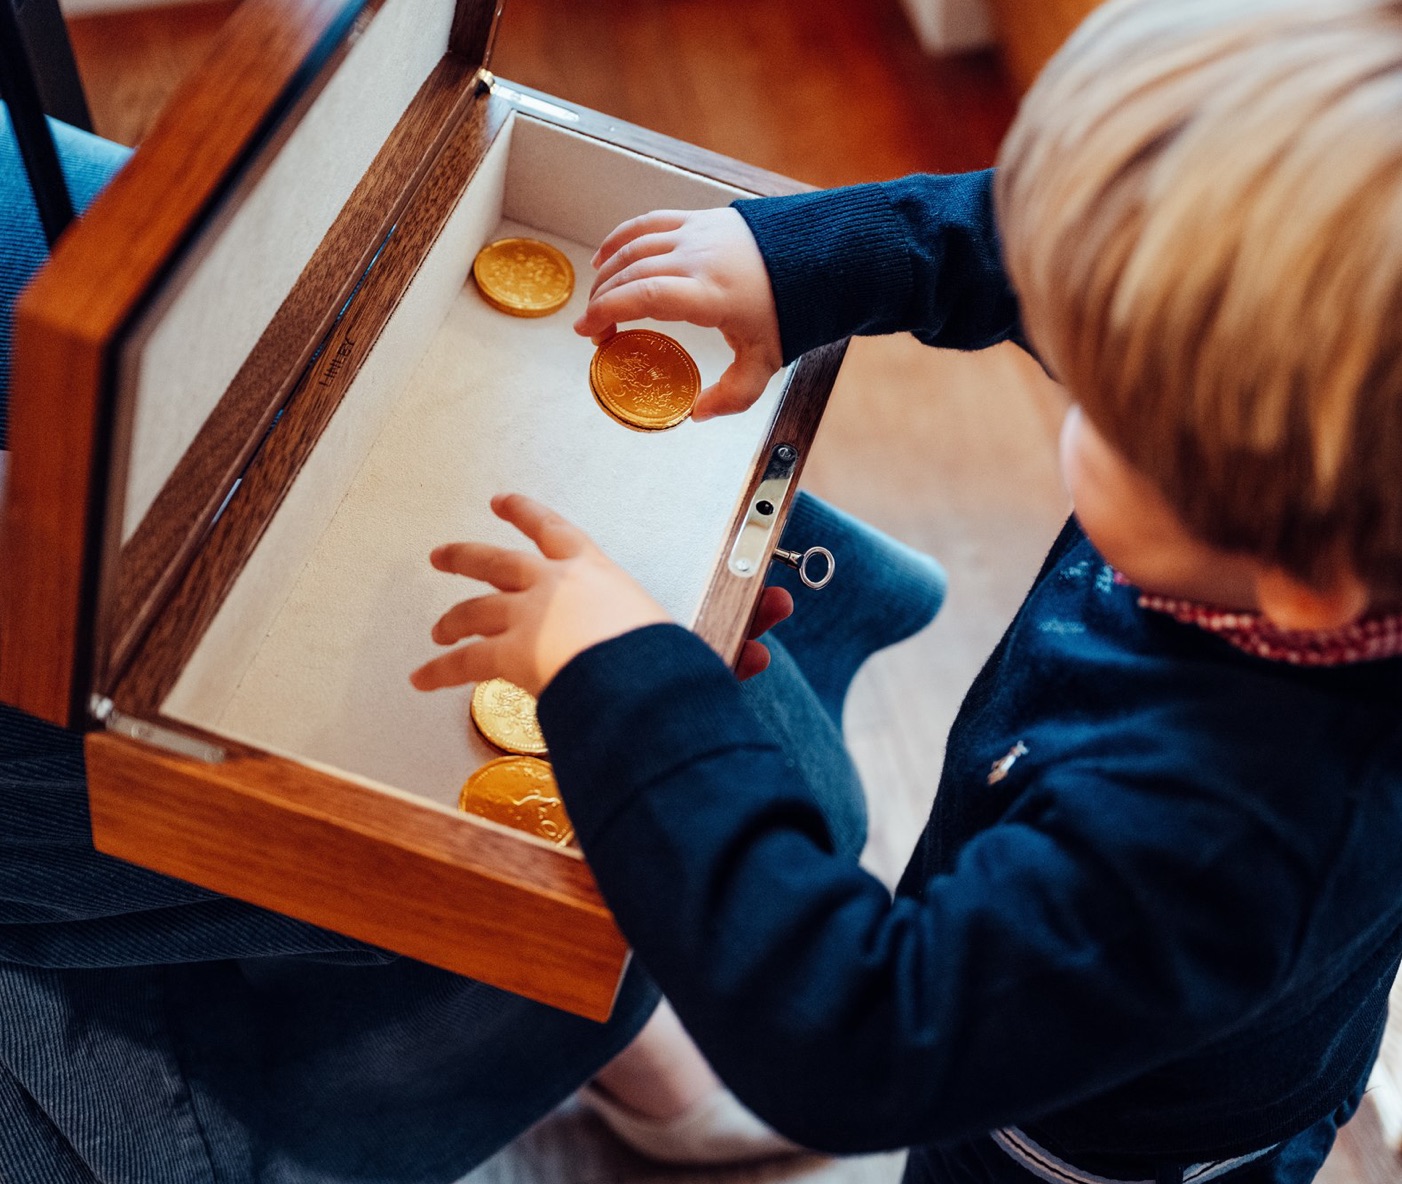 A young boy playing with gold coins inside a box.